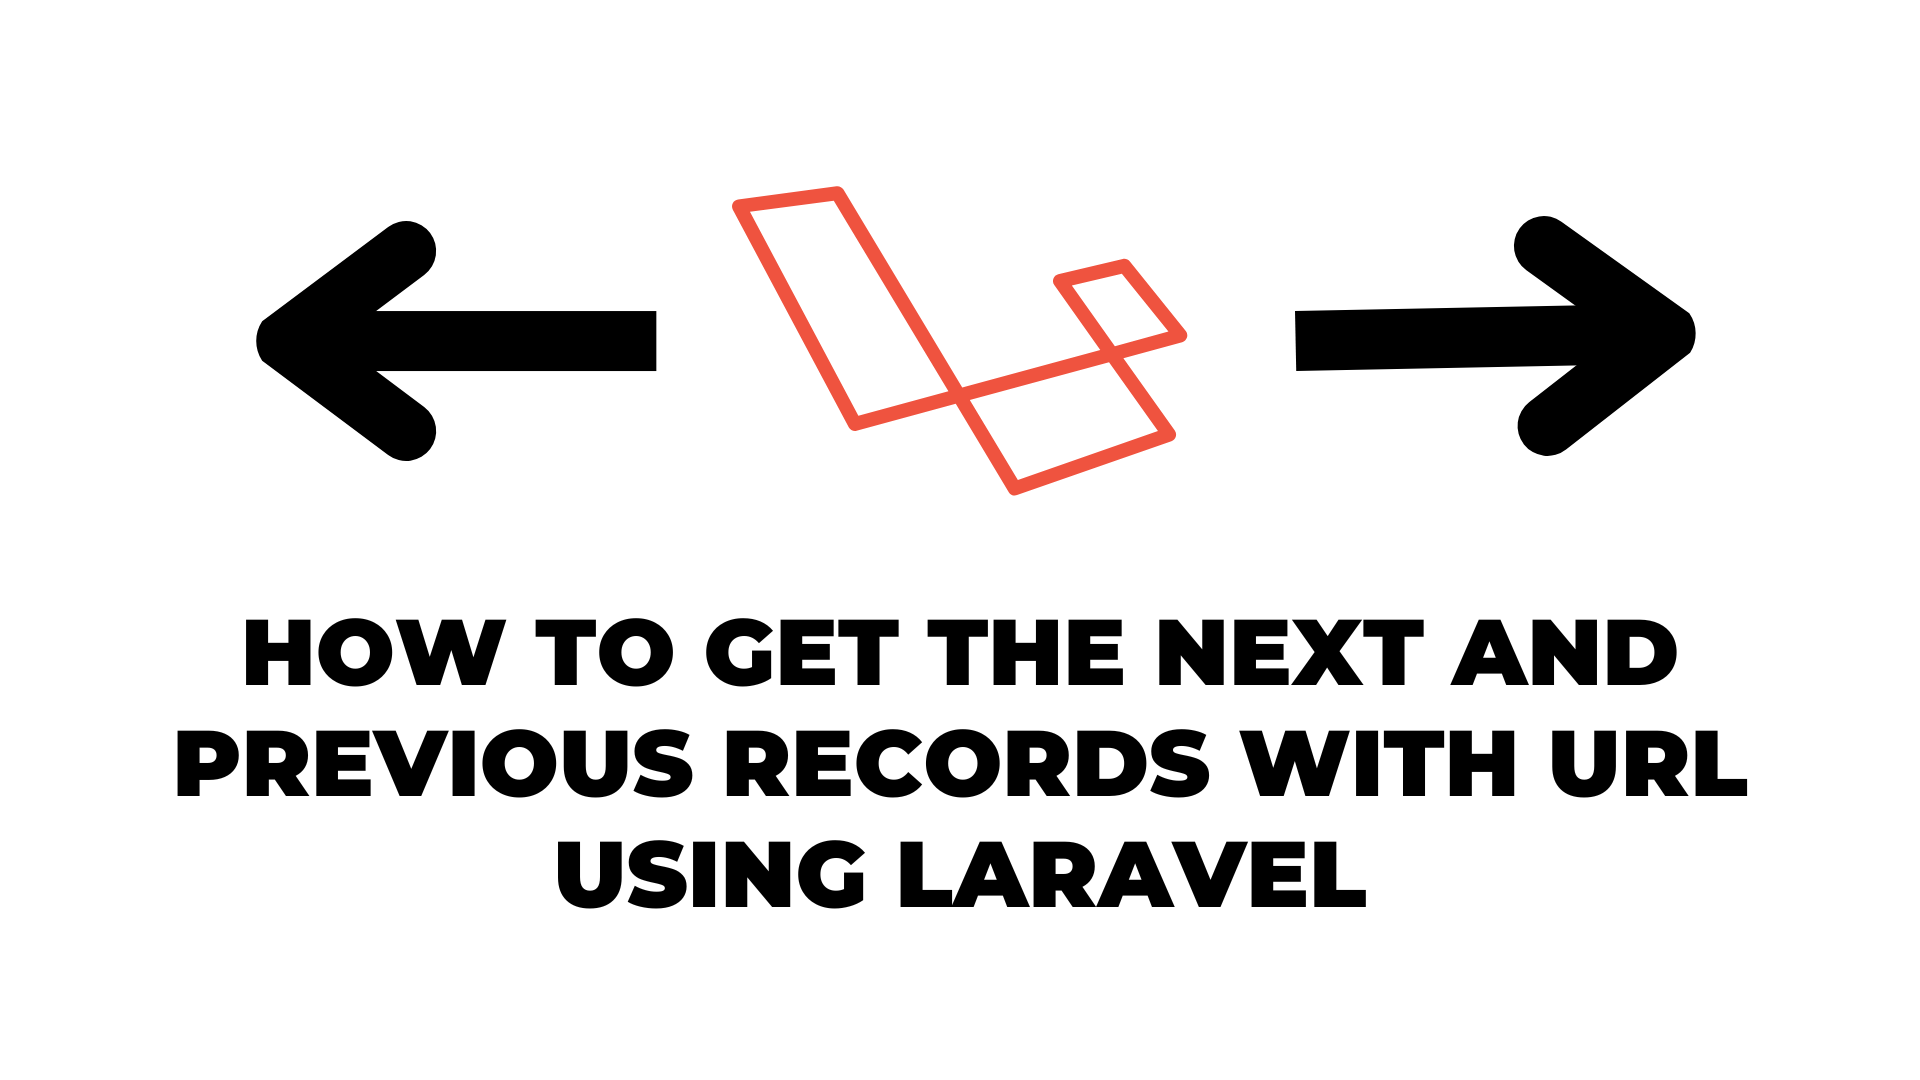 How to get the next and previous records with URL using Laravel